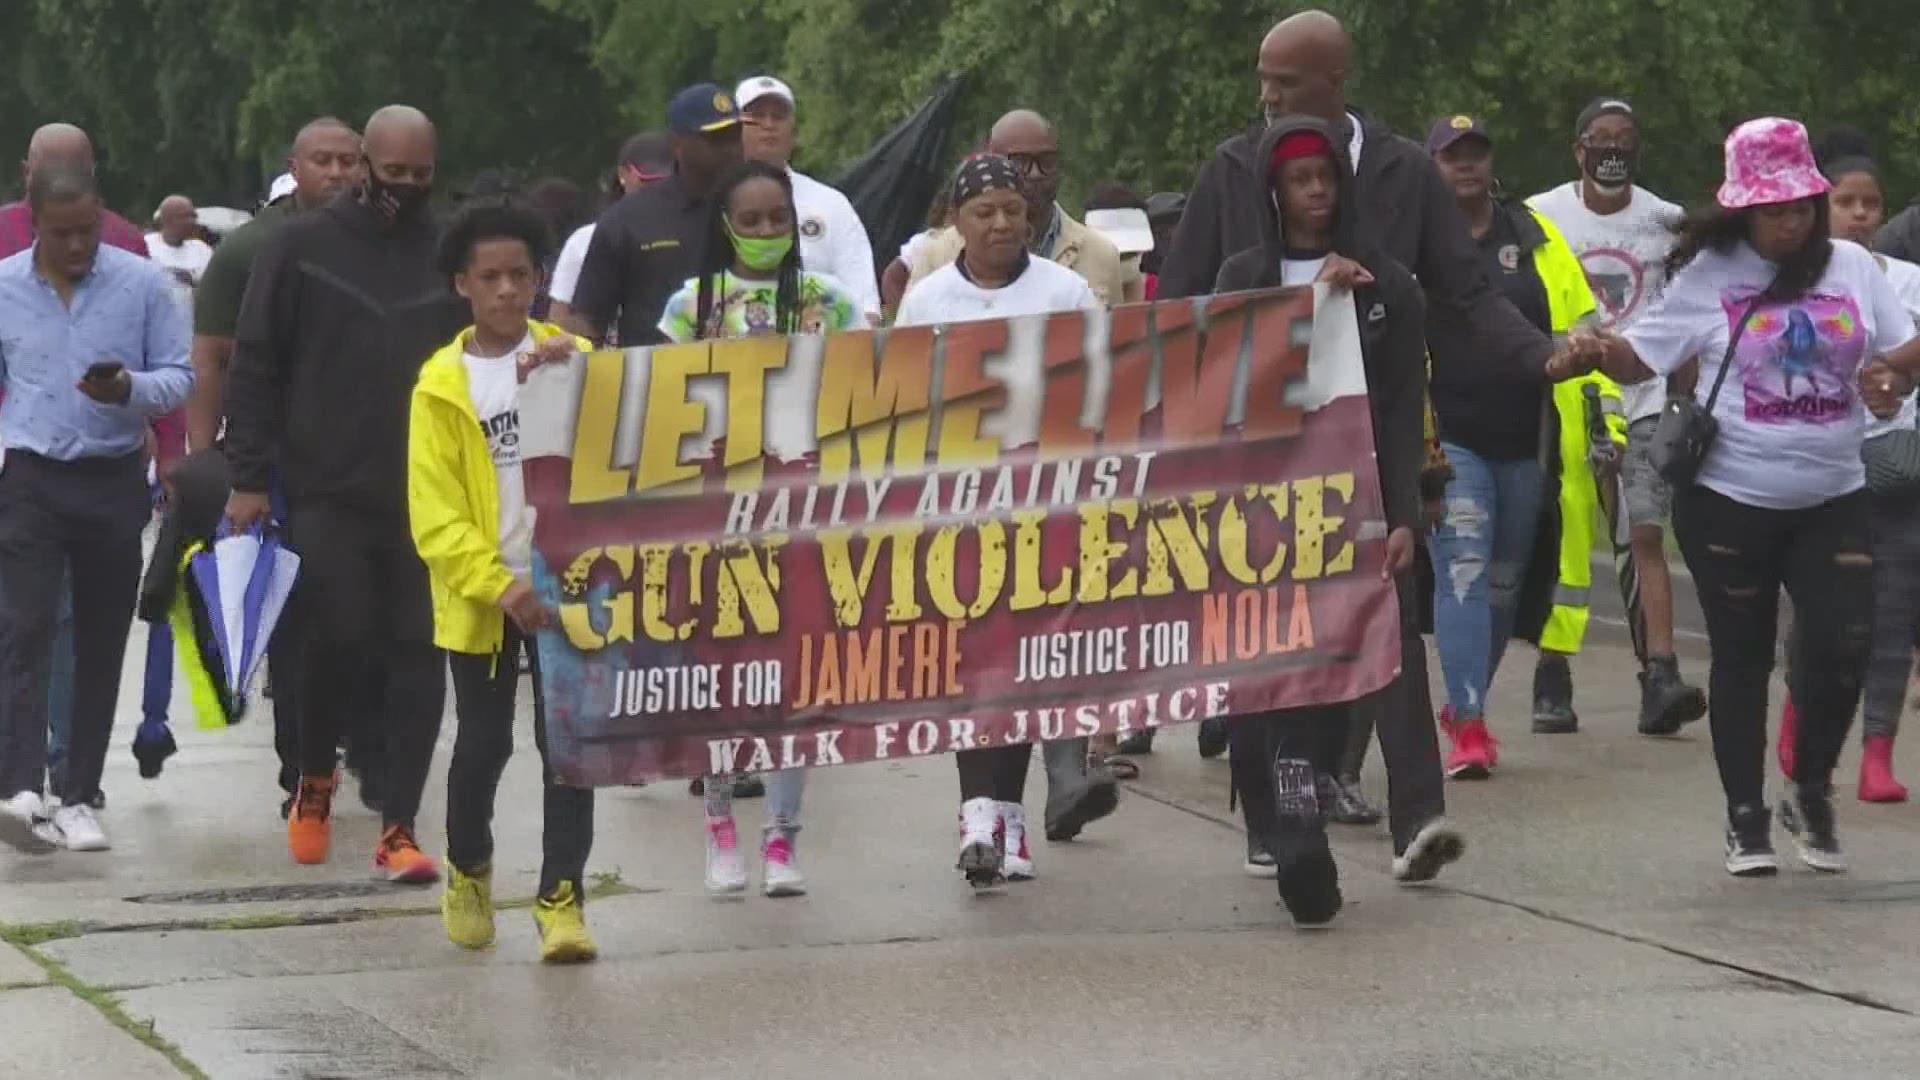 There were 12 people shot in New Orleans this weekend. There was a rally for peace on Saturday but a mass shooting of 9 that night.